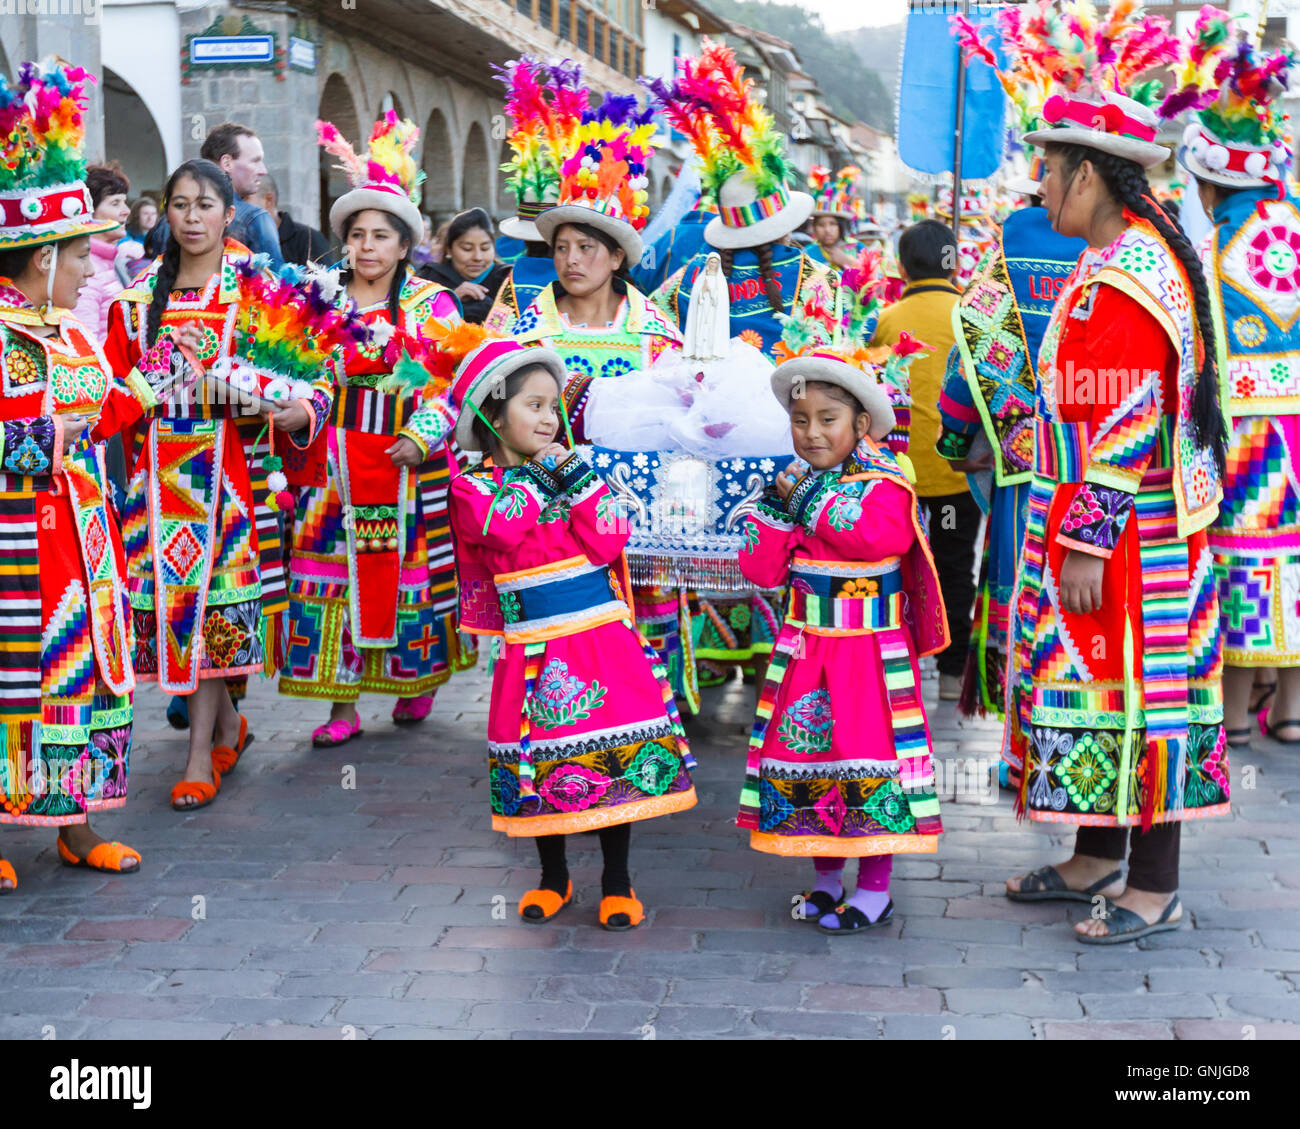 Cusco, Peru - May 13: Native people of Cusco dressed in colorful clothing in a religious celebration for Nuestra Señora de Fatim Stock Photo